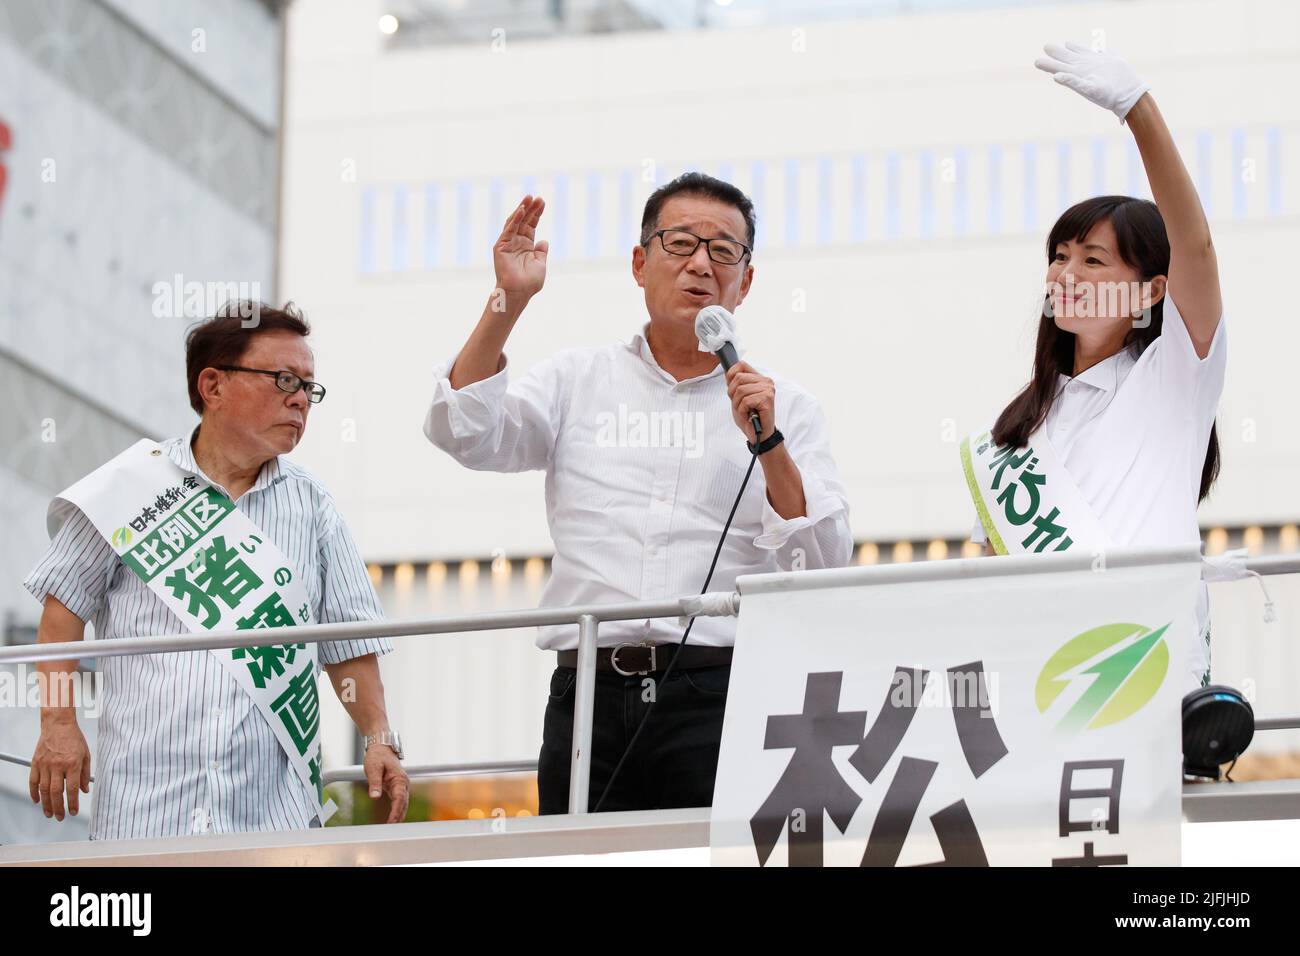 Leader of Japan Innovation Party, Ichiro Matsui(C) appeals to voters to speak in support of the his party's candidates Naoki Inose(L) and Yuki Ebisawa(R) during an Upper House electio campaign in Tokyo, Japan on July, 02, 2022. (Photo Motoo Naka/AFLO) Stock Photo